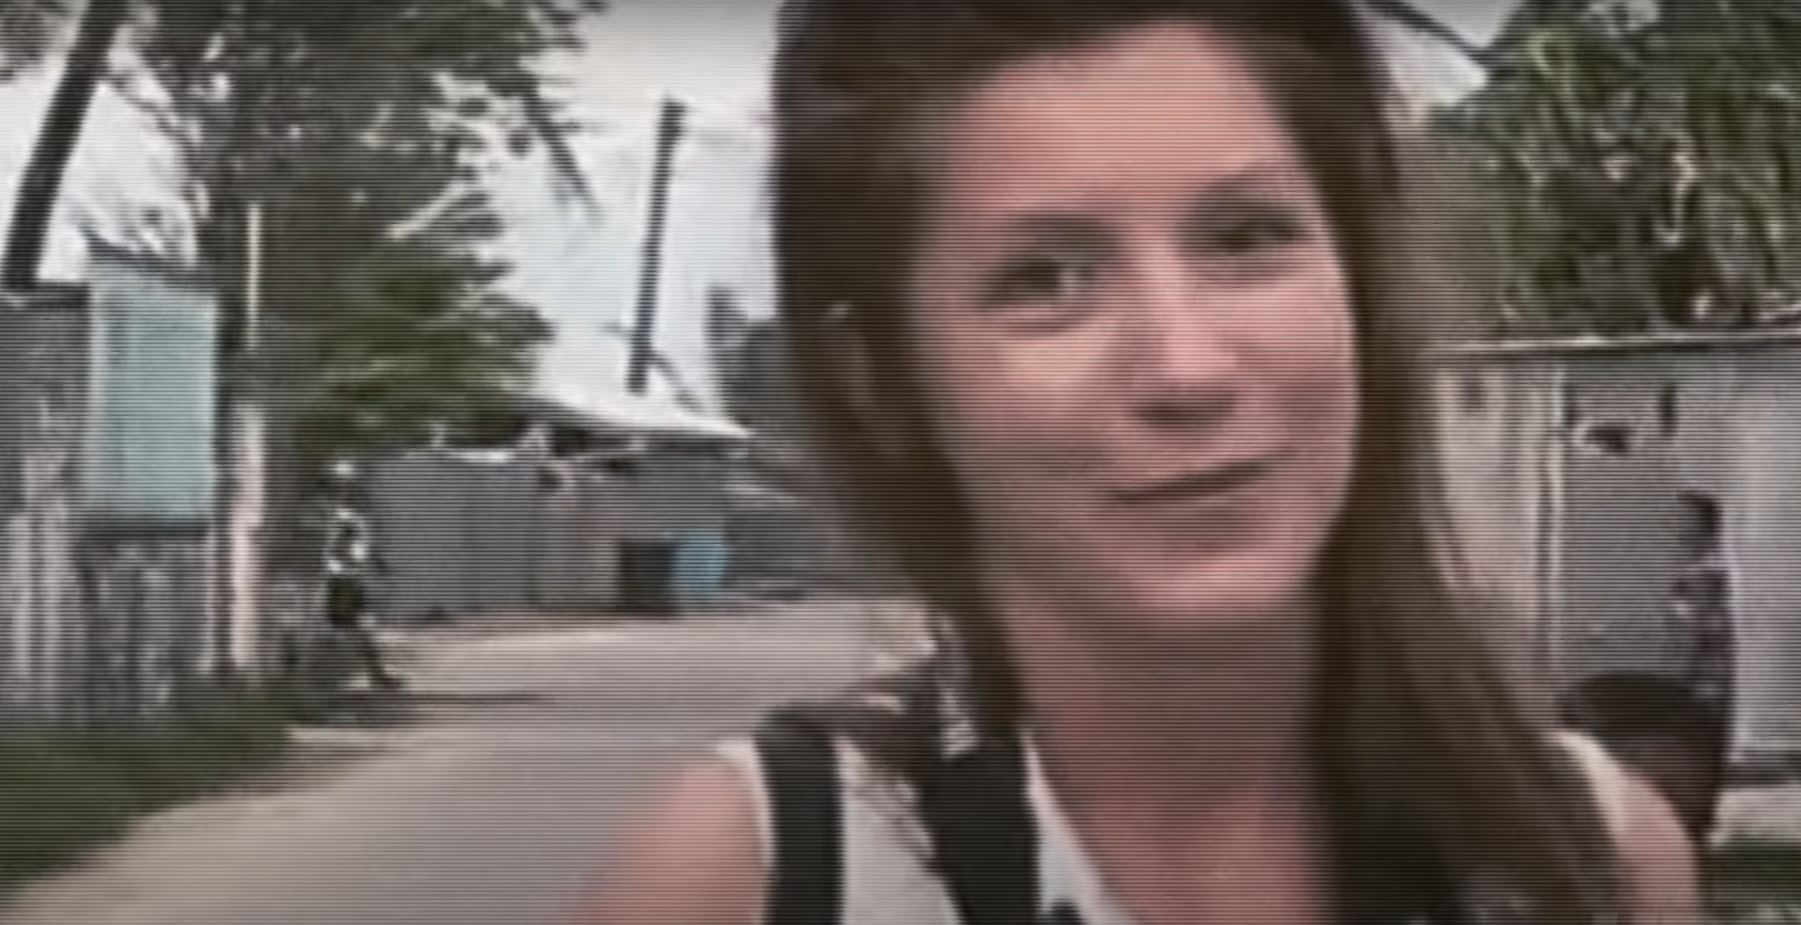 Trailer Watch: Erin Lee Carr Revisits the Submarine Murder in “Undercurrent: The Disappearance of Kim Wall”